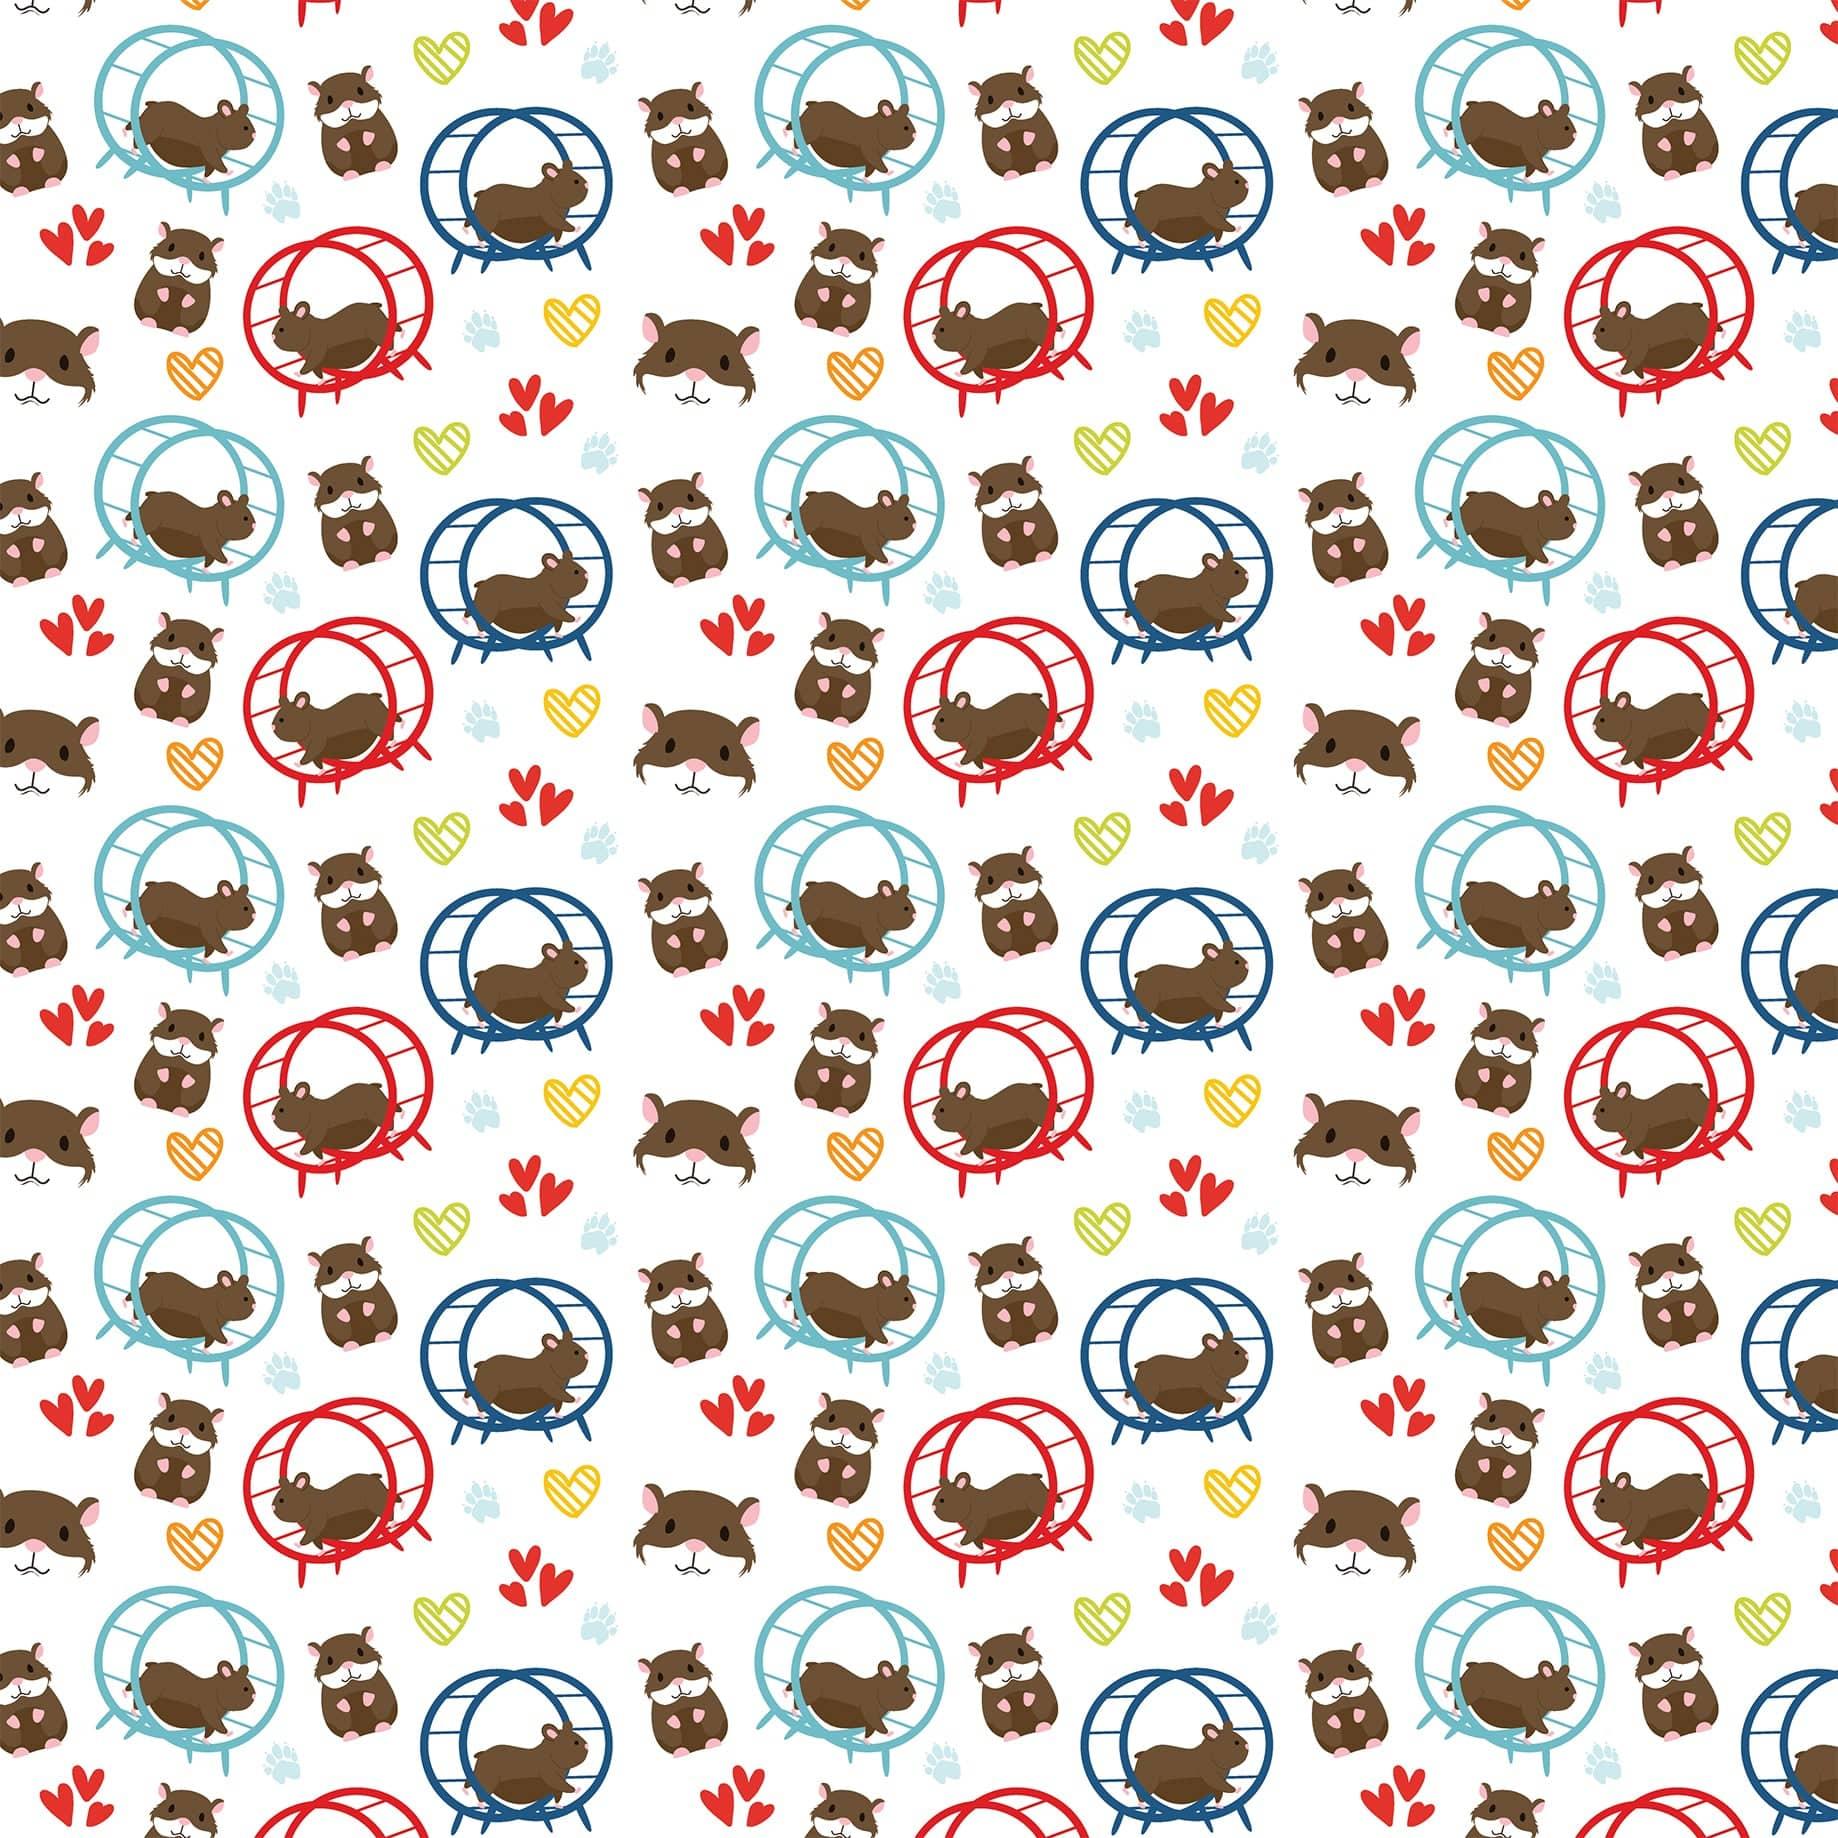 Pets Collection On A Roll 12 x 12 Double-Sided Scrapbook Paper by Echo Park Paper - Scrapbook Supply Companies